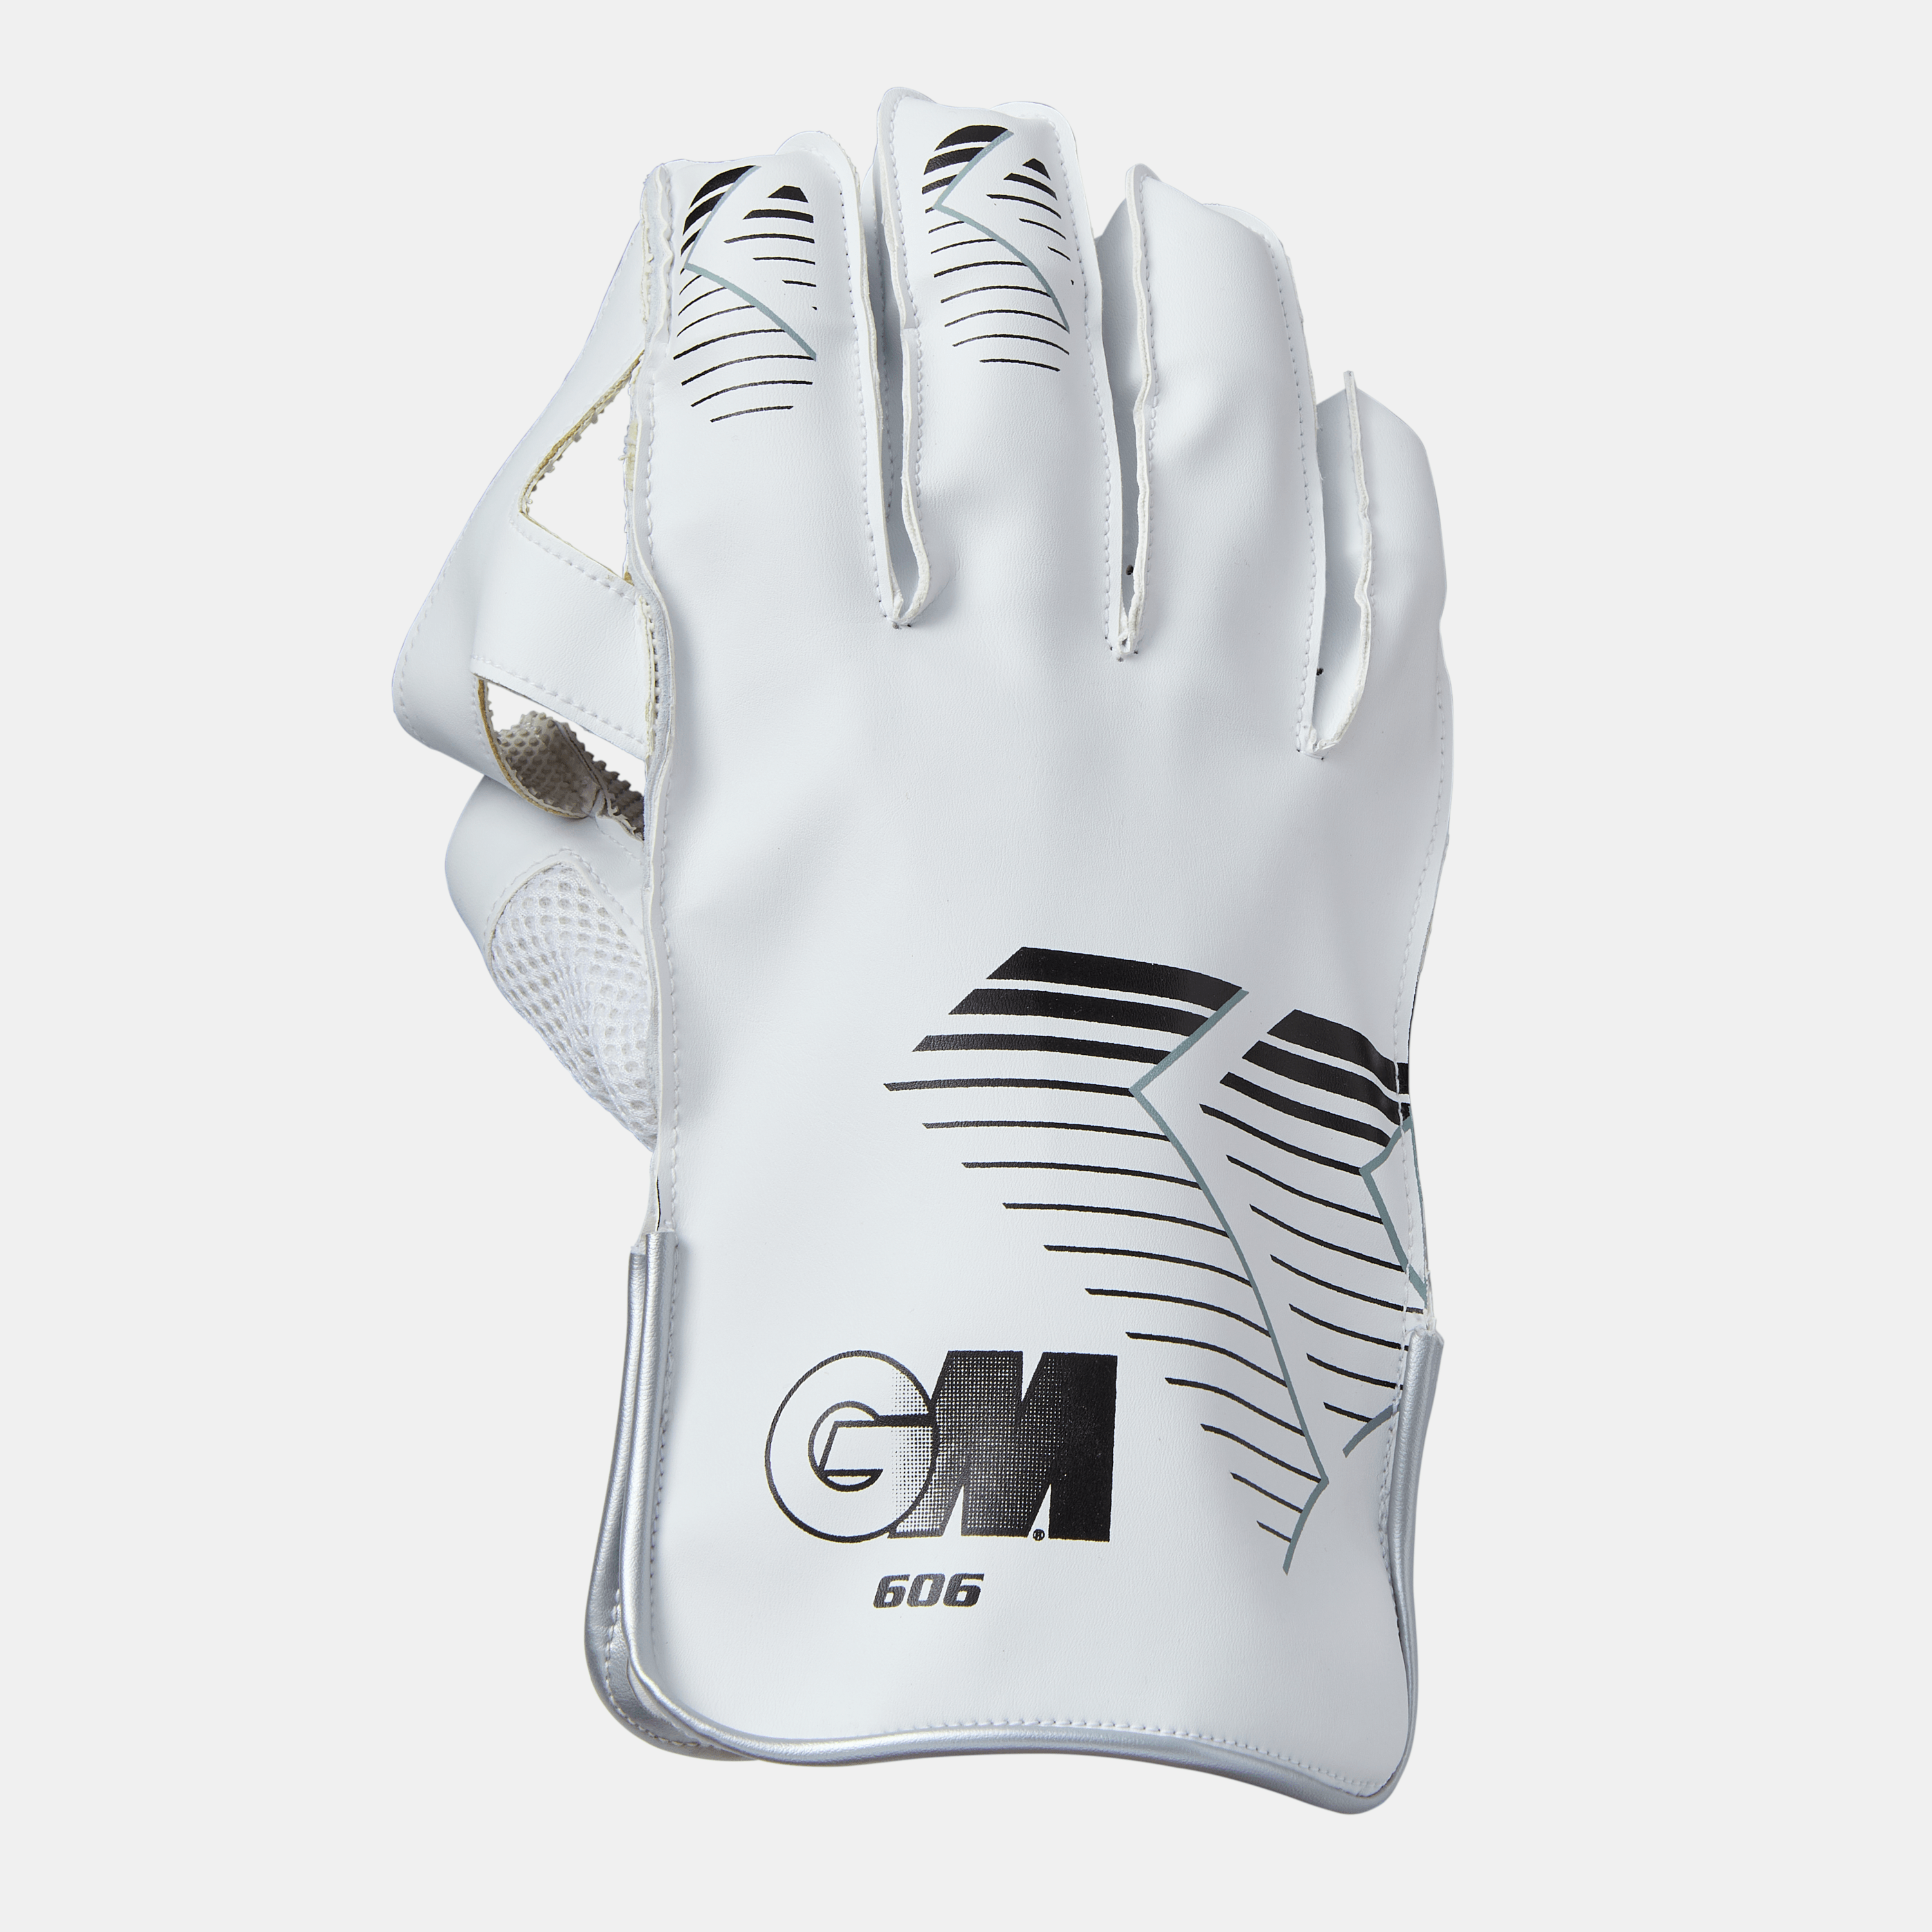 GM 606 Wicket Keeping Gloves - ADULT - AT Sports